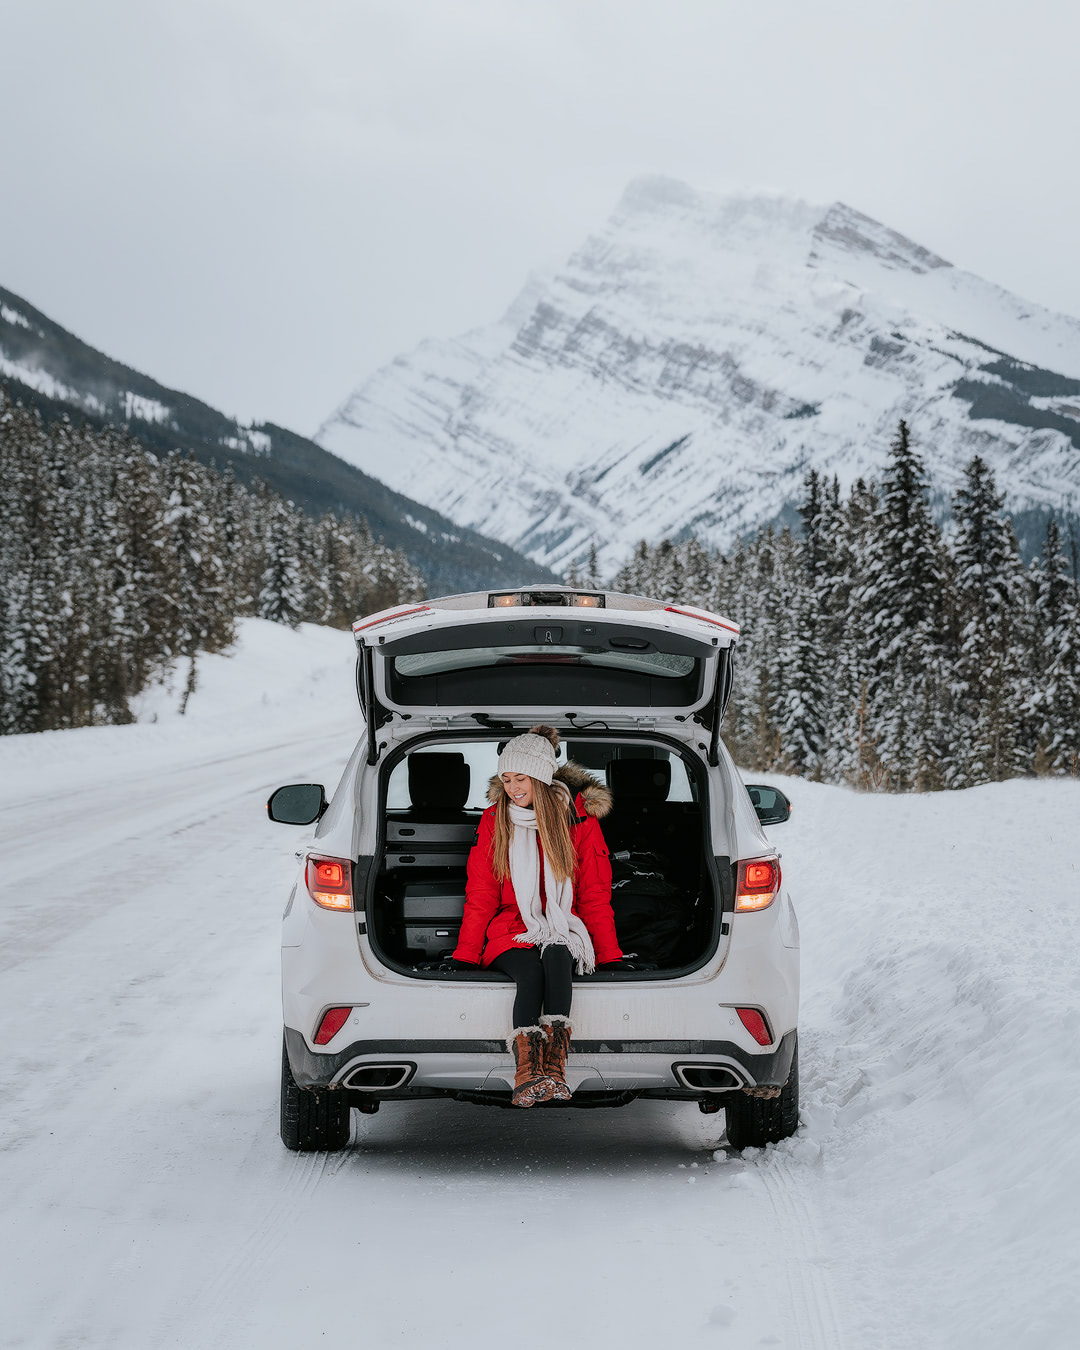 ULTIMATE WINTER TRAVEL GUIDE TO ALBERTA CANADA – 7 DAY ITINERARY - Renee Roaming 